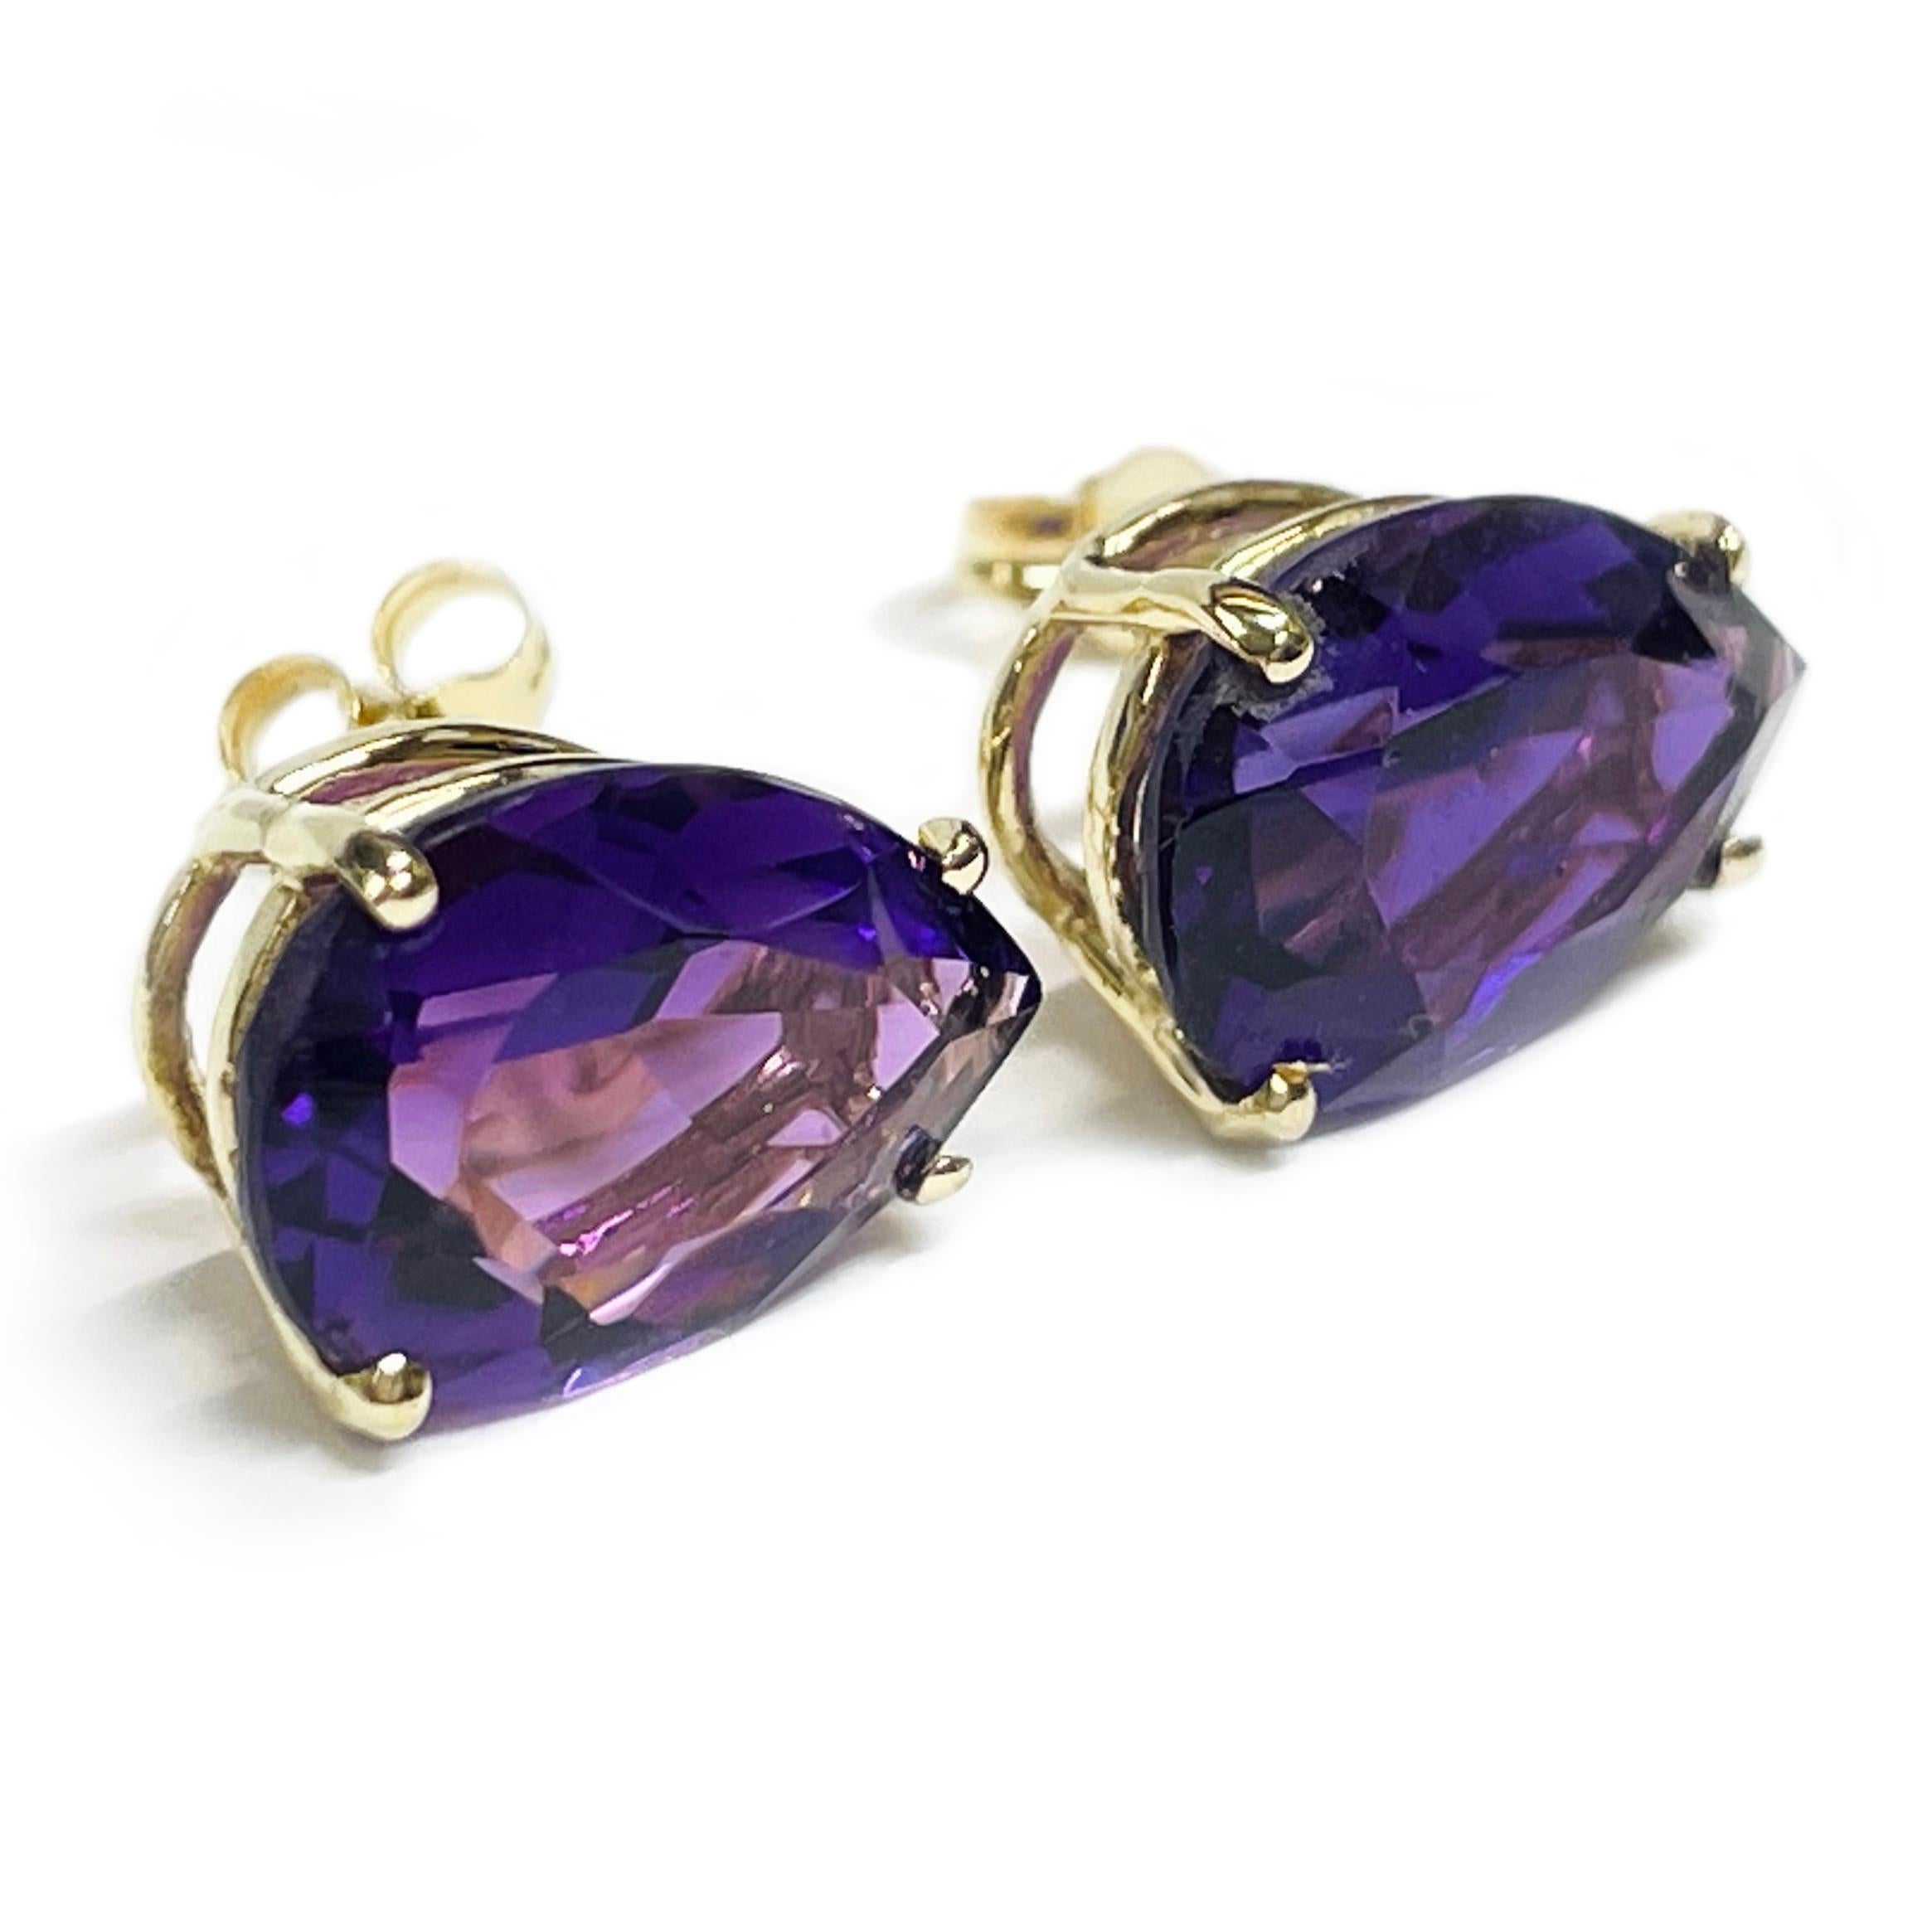 14 Karat Yellow Gold Amethyst Stud Earrings. The earrings each feature a 12 x 8mm pear-shaped Amethyst stone. The medium colored purple gemstones are four-prong-set in a basket setting. The earrings measure 12mm tall and 10mm wide. The total